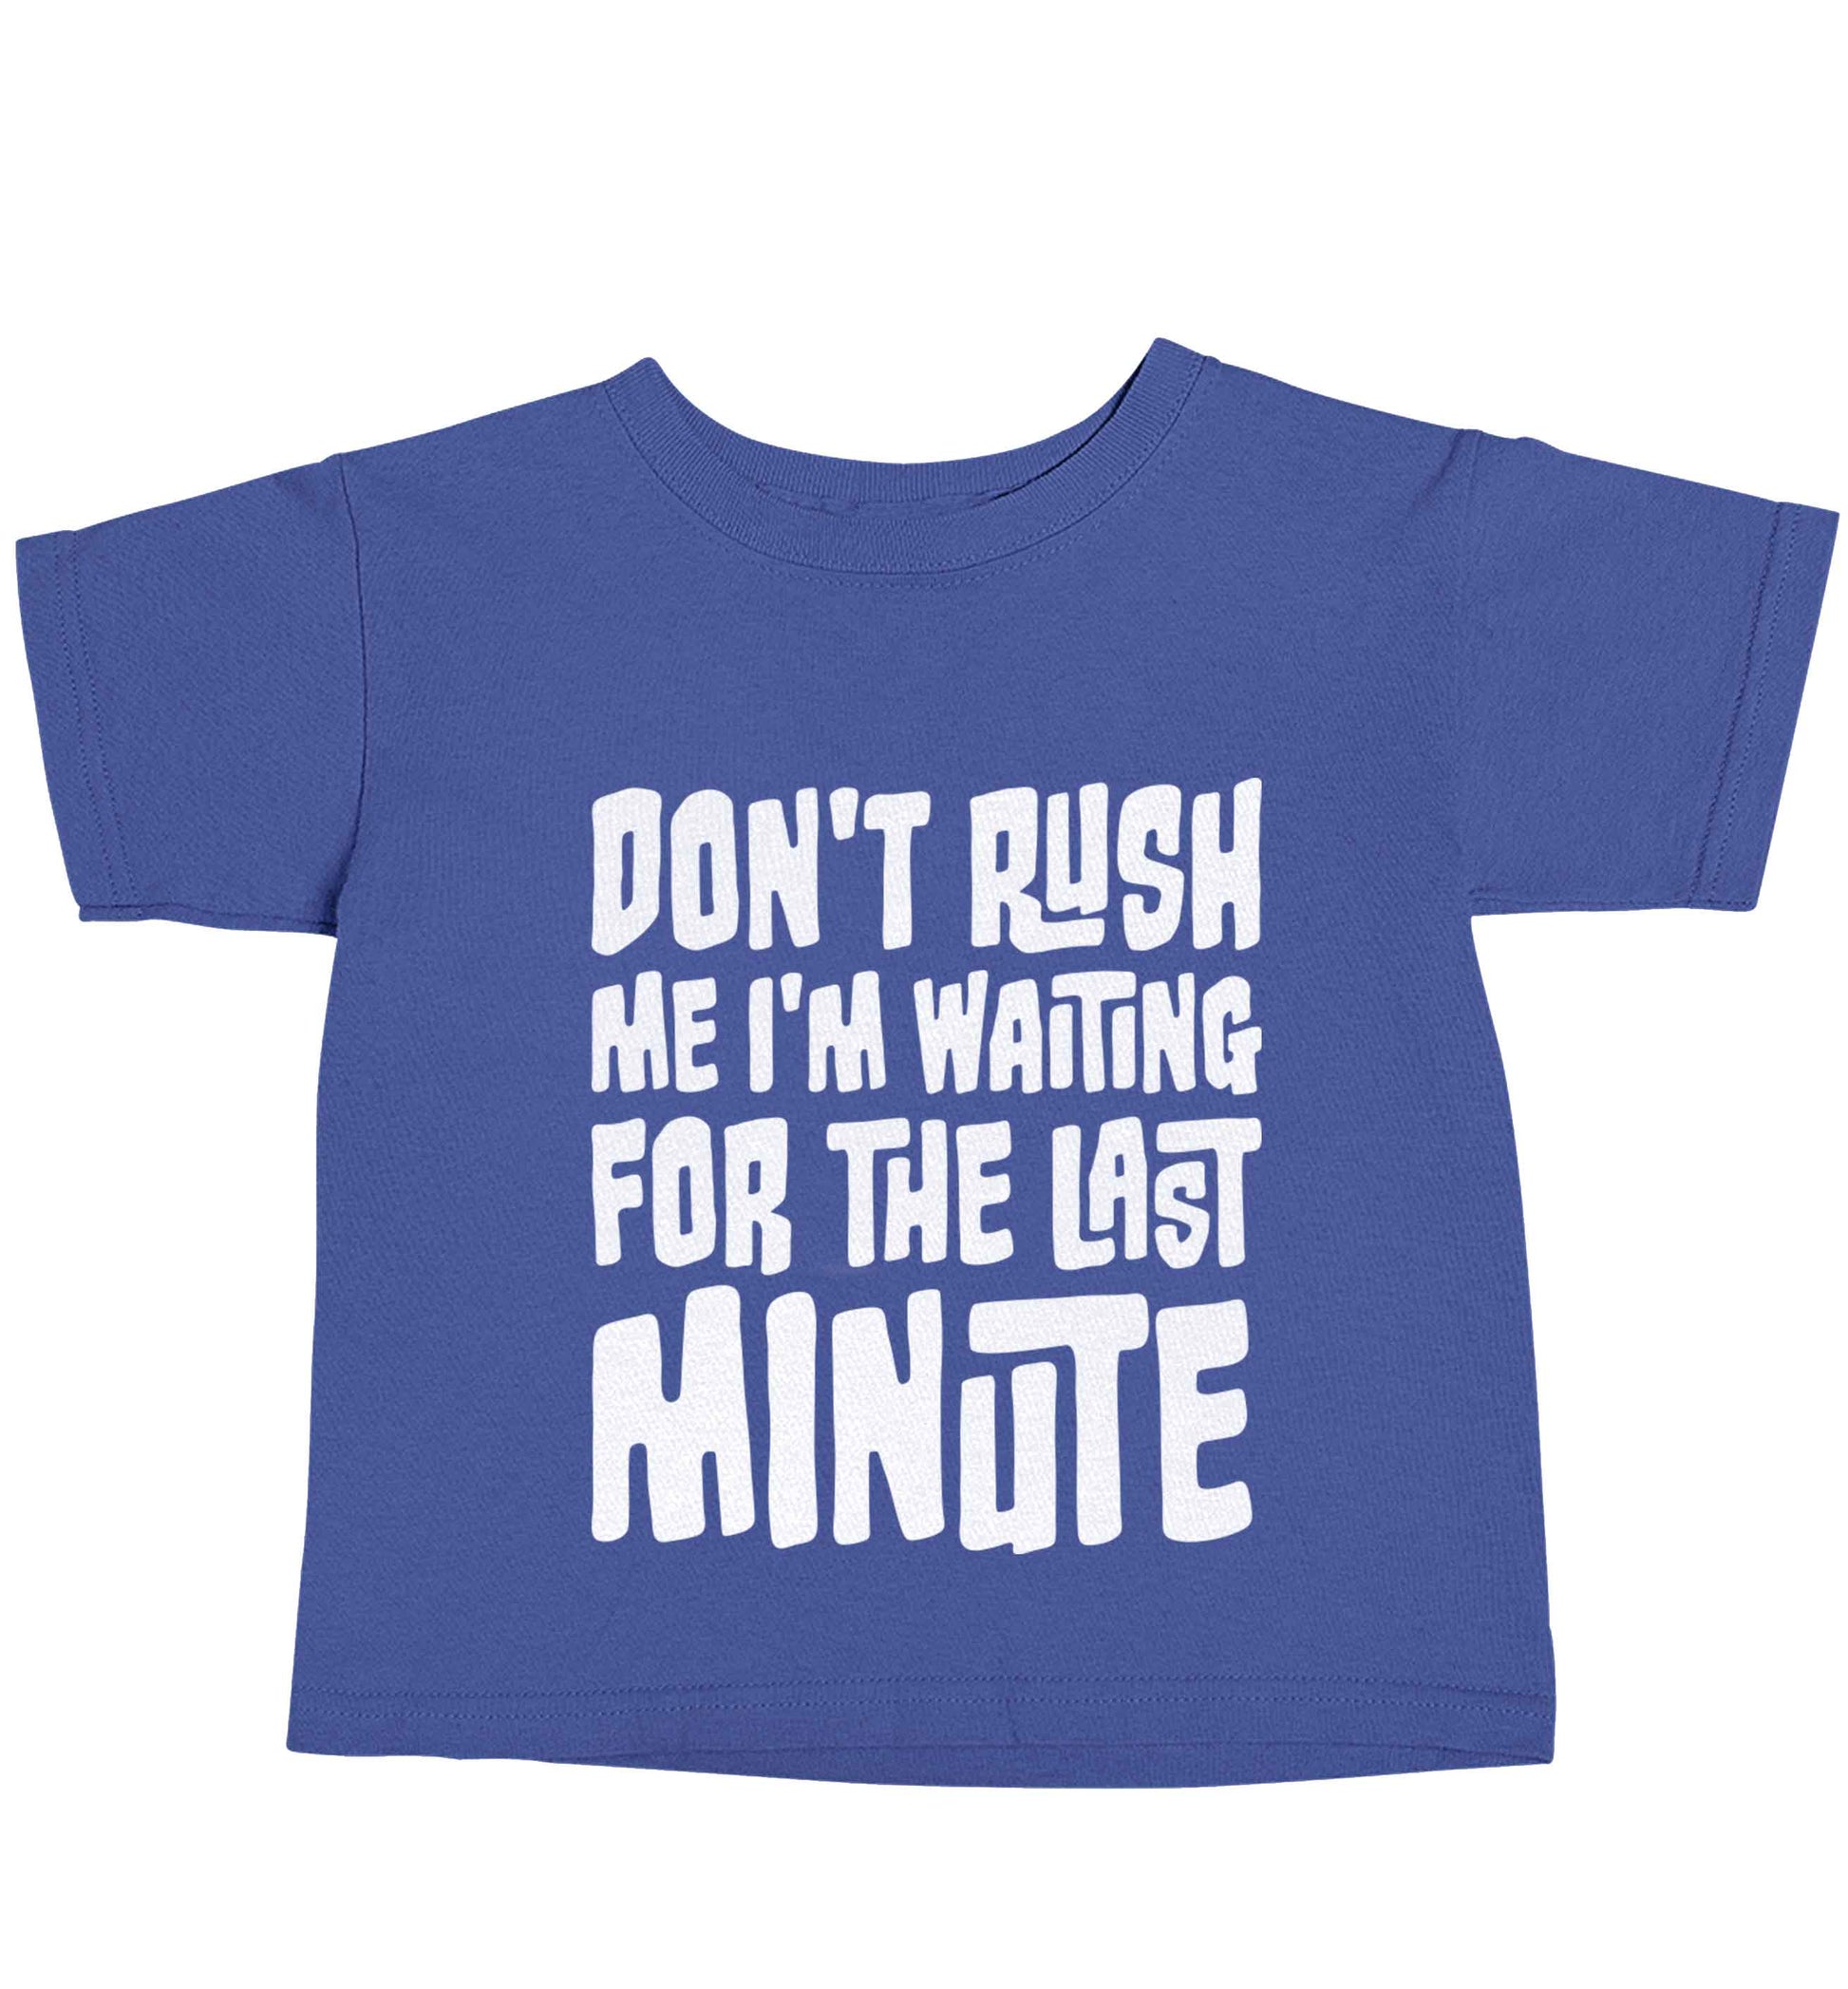 Don't rush me I'm waiting for the last minute blue baby toddler Tshirt 2 Years